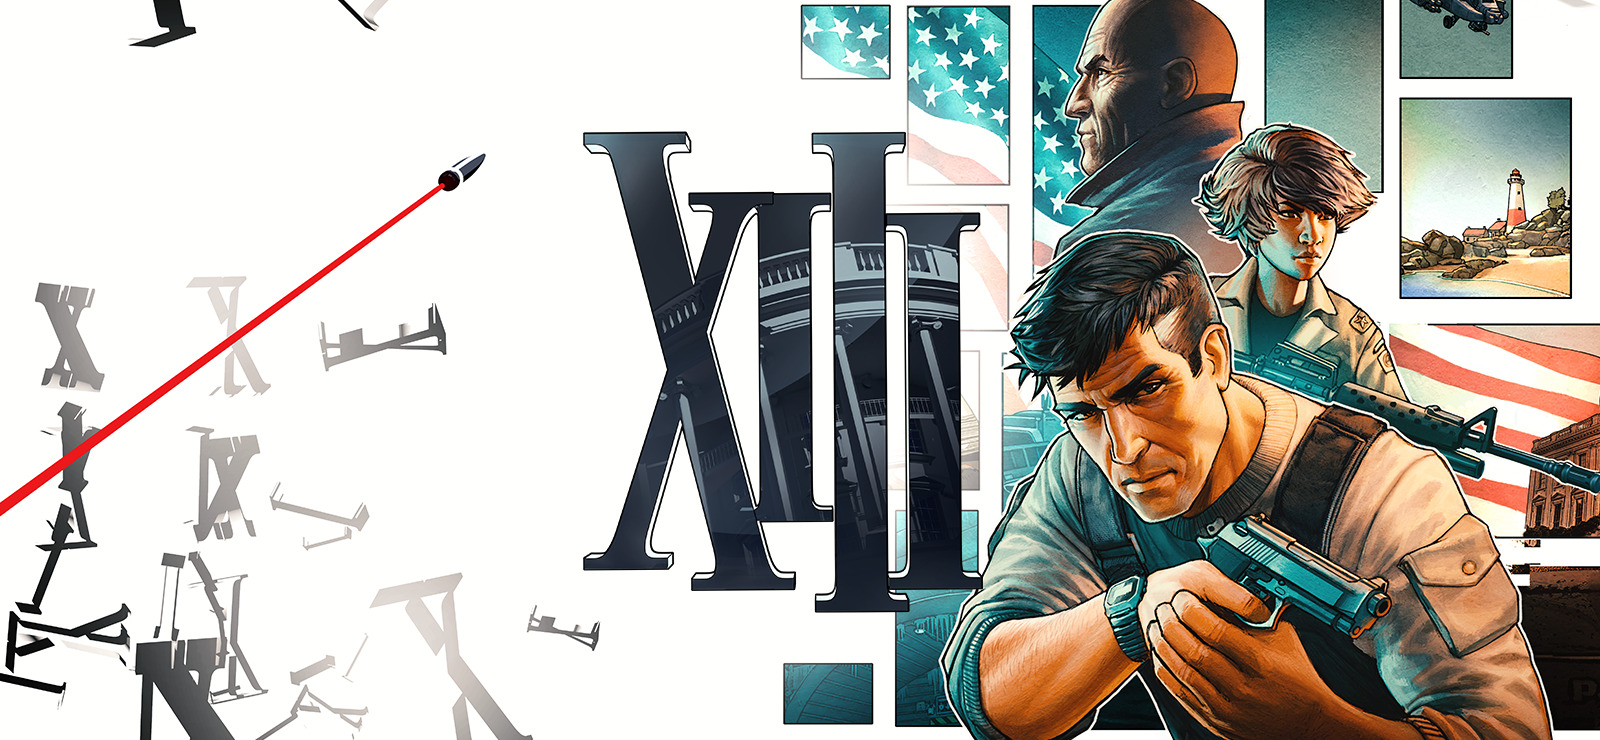 xiii 2 download